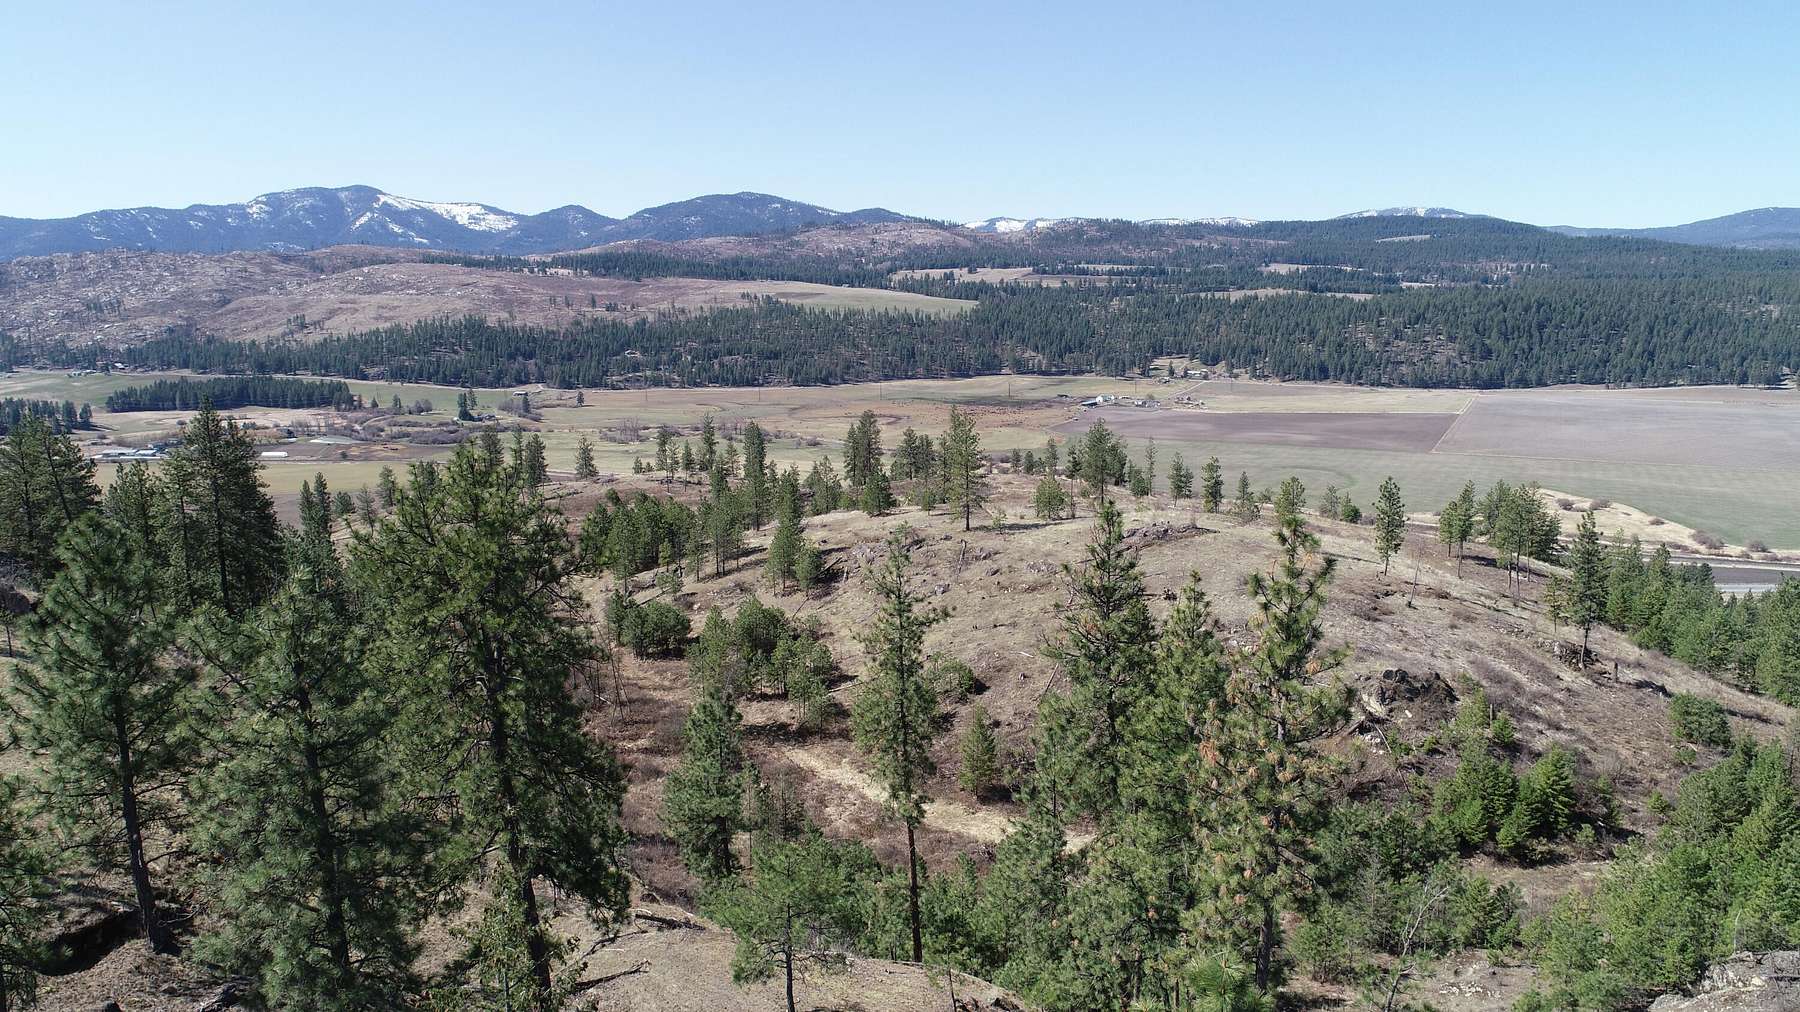 218 Acres of Land for Sale in Colville, Washington